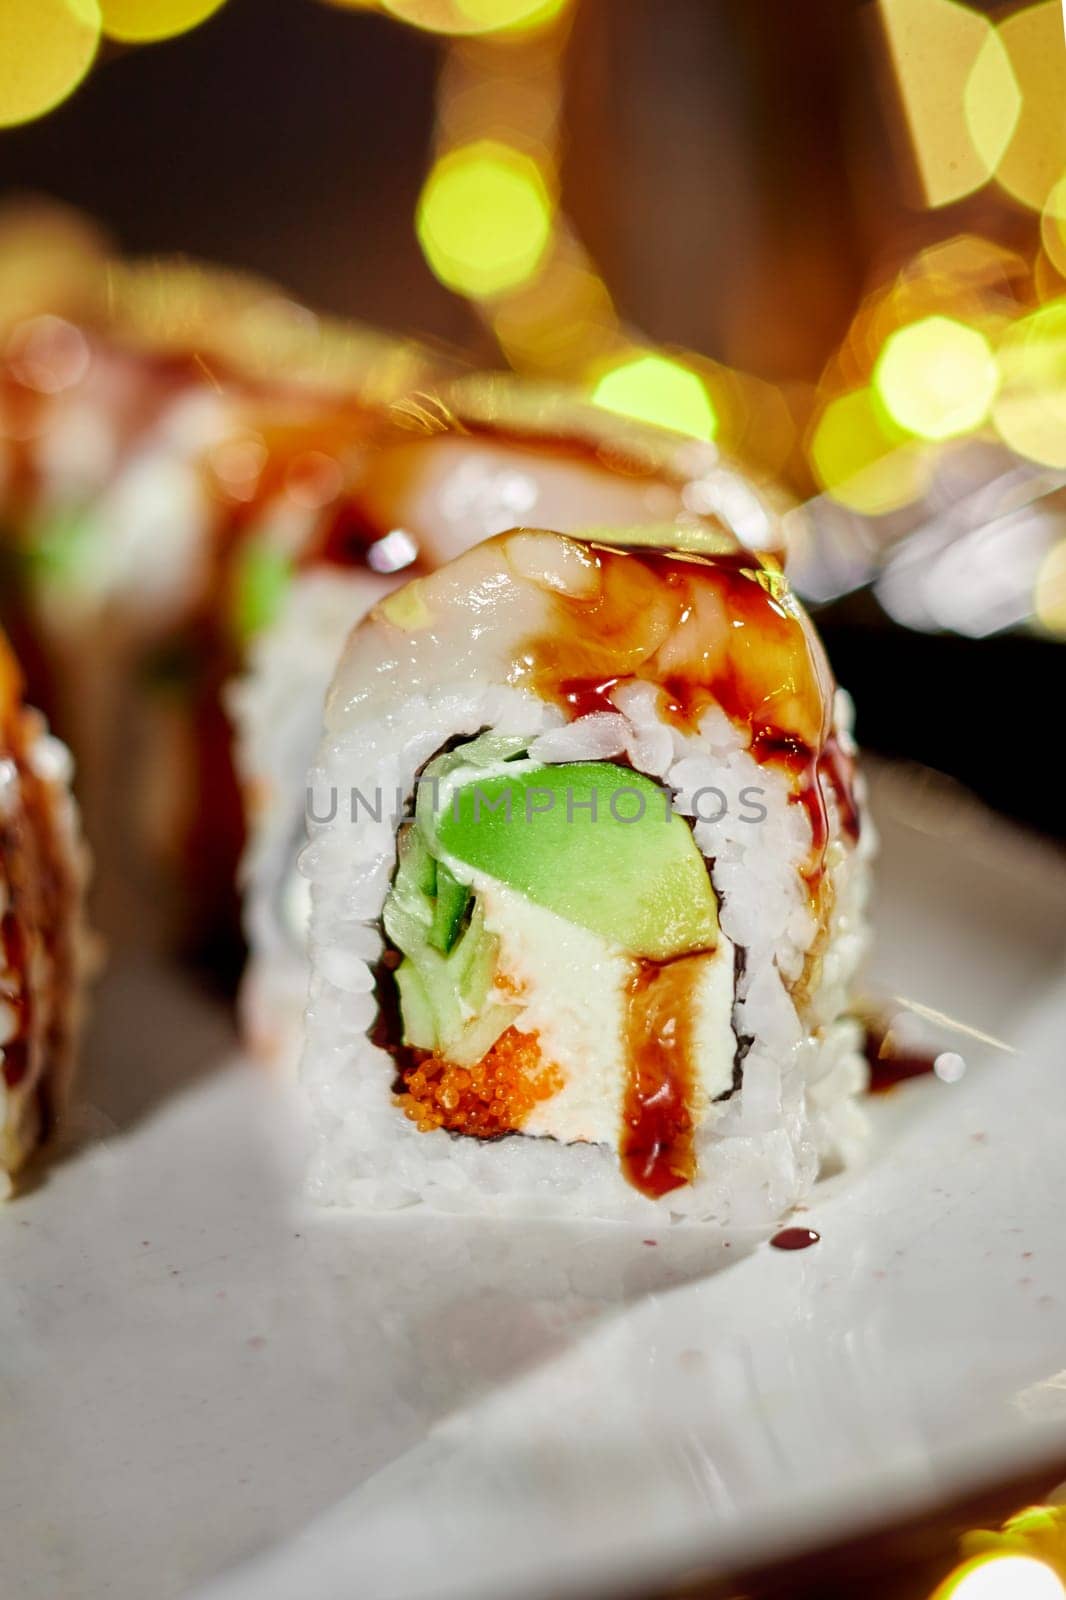 Sushi roll with scallop, cream cheese, masago and avocado against festive lights by nazarovsergey